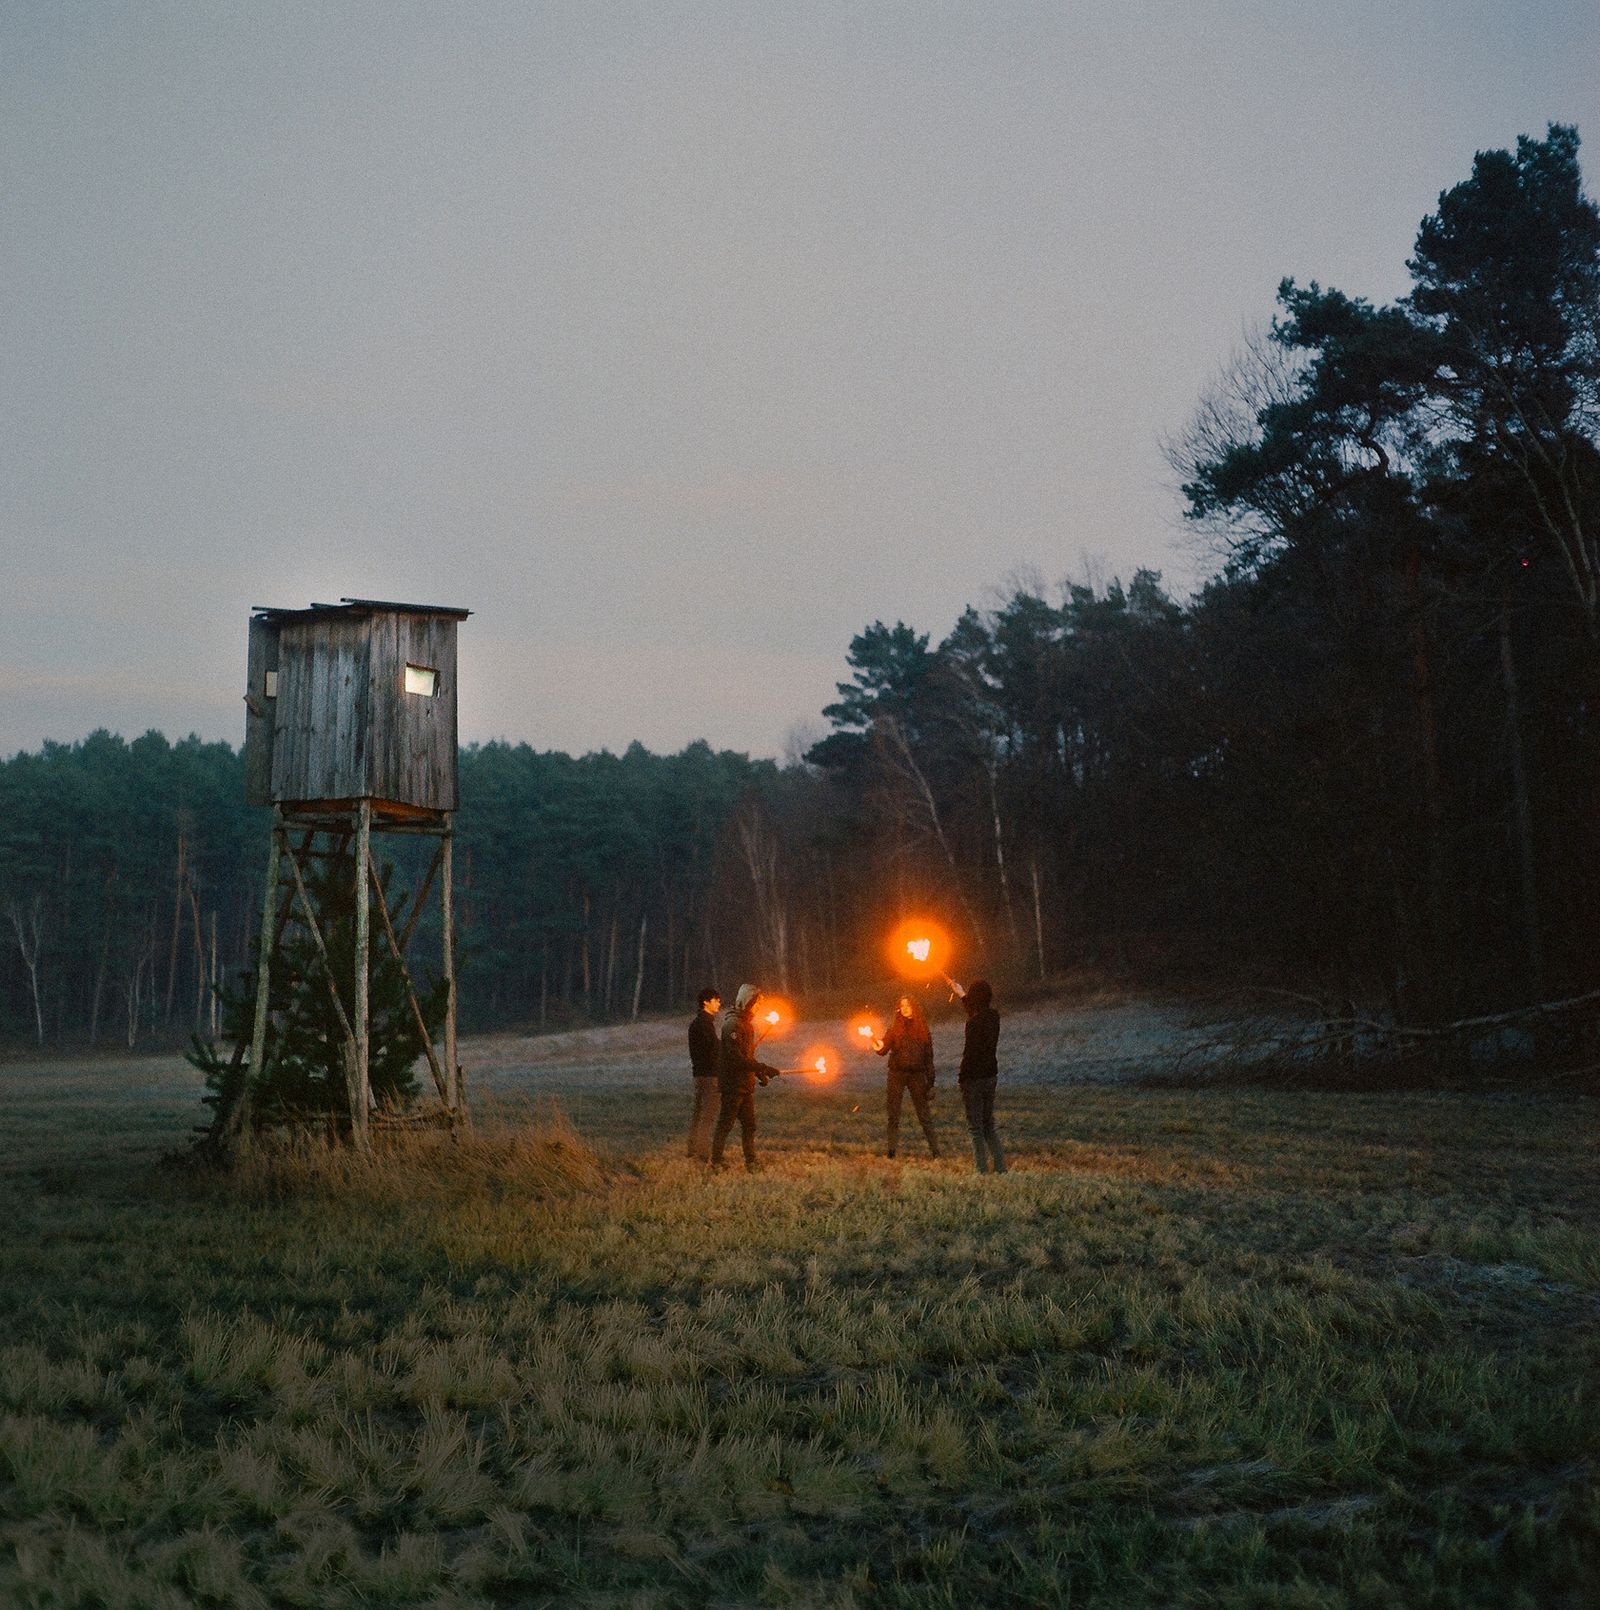 © Laura Pannack - Image from the Chapter 2- Tales from The Dübener Heide photography project